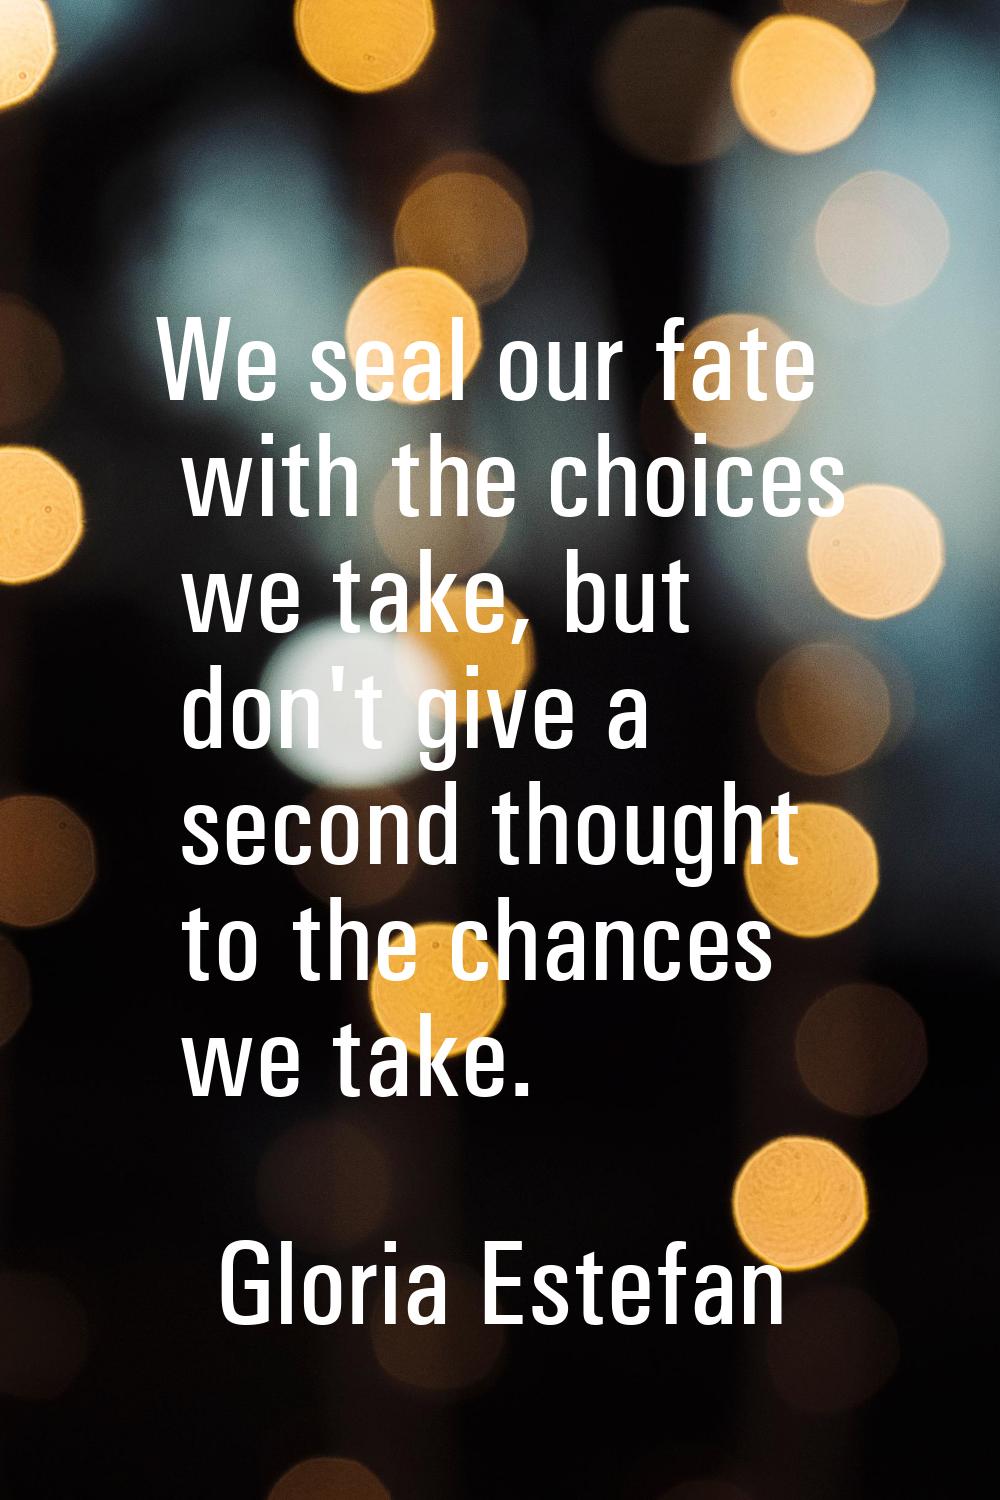 We seal our fate with the choices we take, but don't give a second thought to the chances we take.